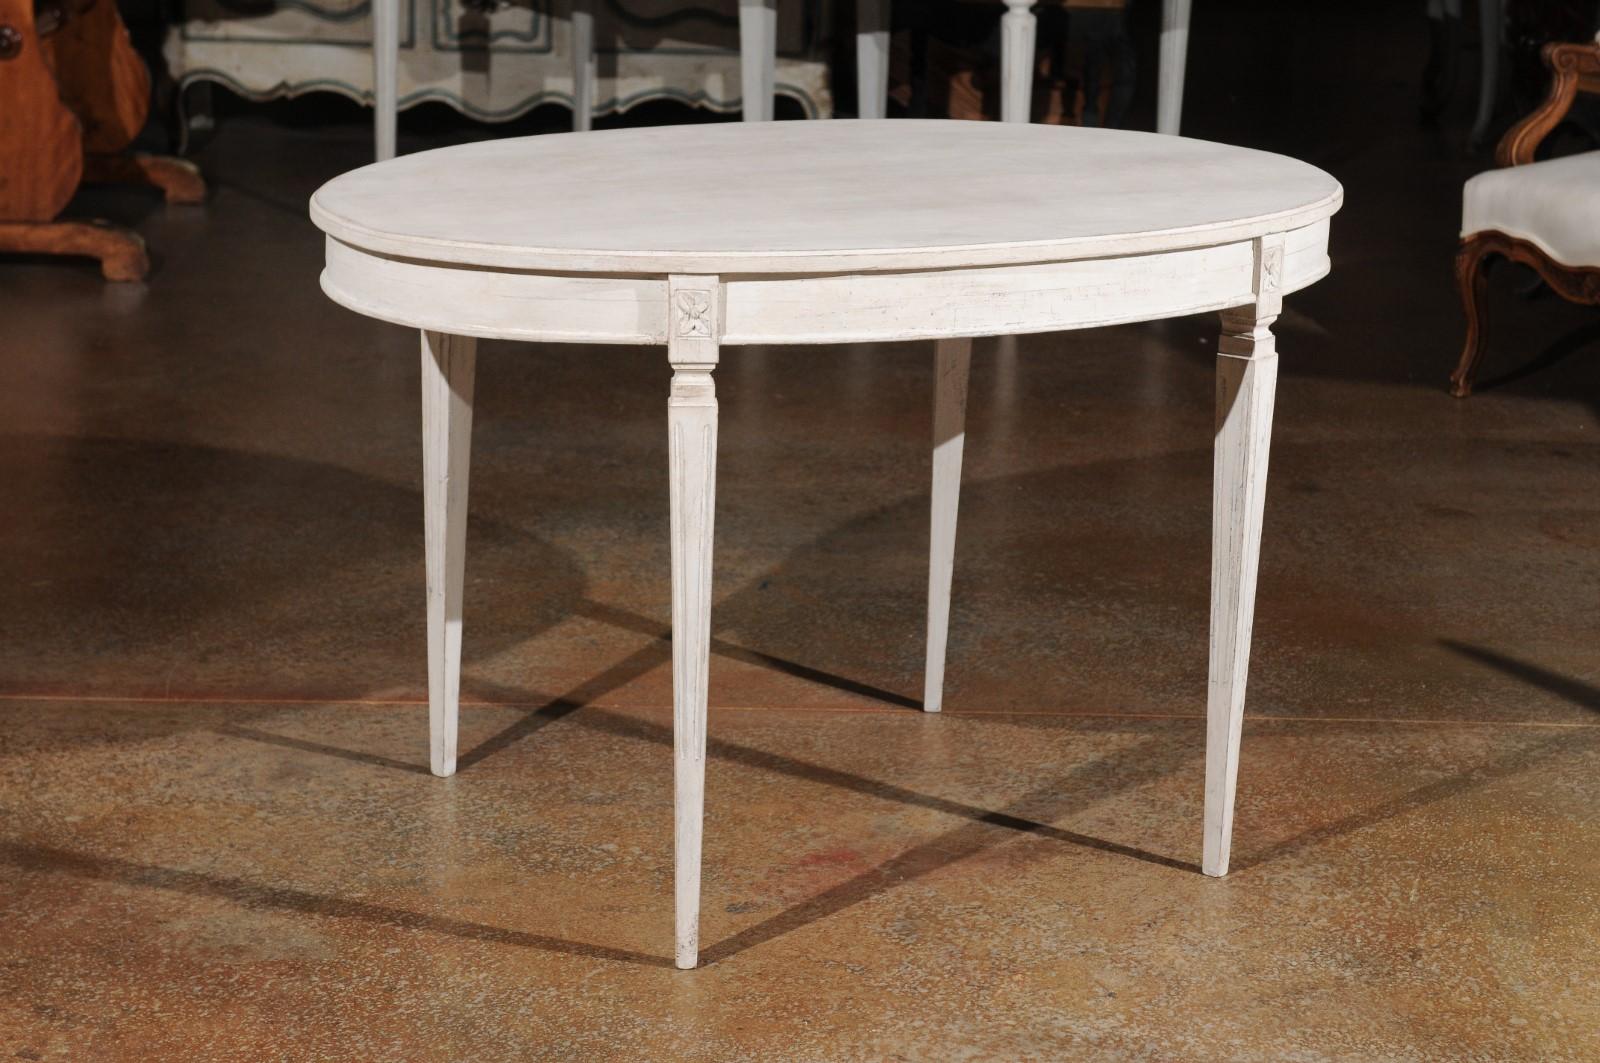 A Swedish Gustavian style painted oval table from the late 19th century with carved rosettes and tapered legs. Born in Sweden during the later years of the 19th century, this table presents the stylistic characteristics of the Gustavian period.